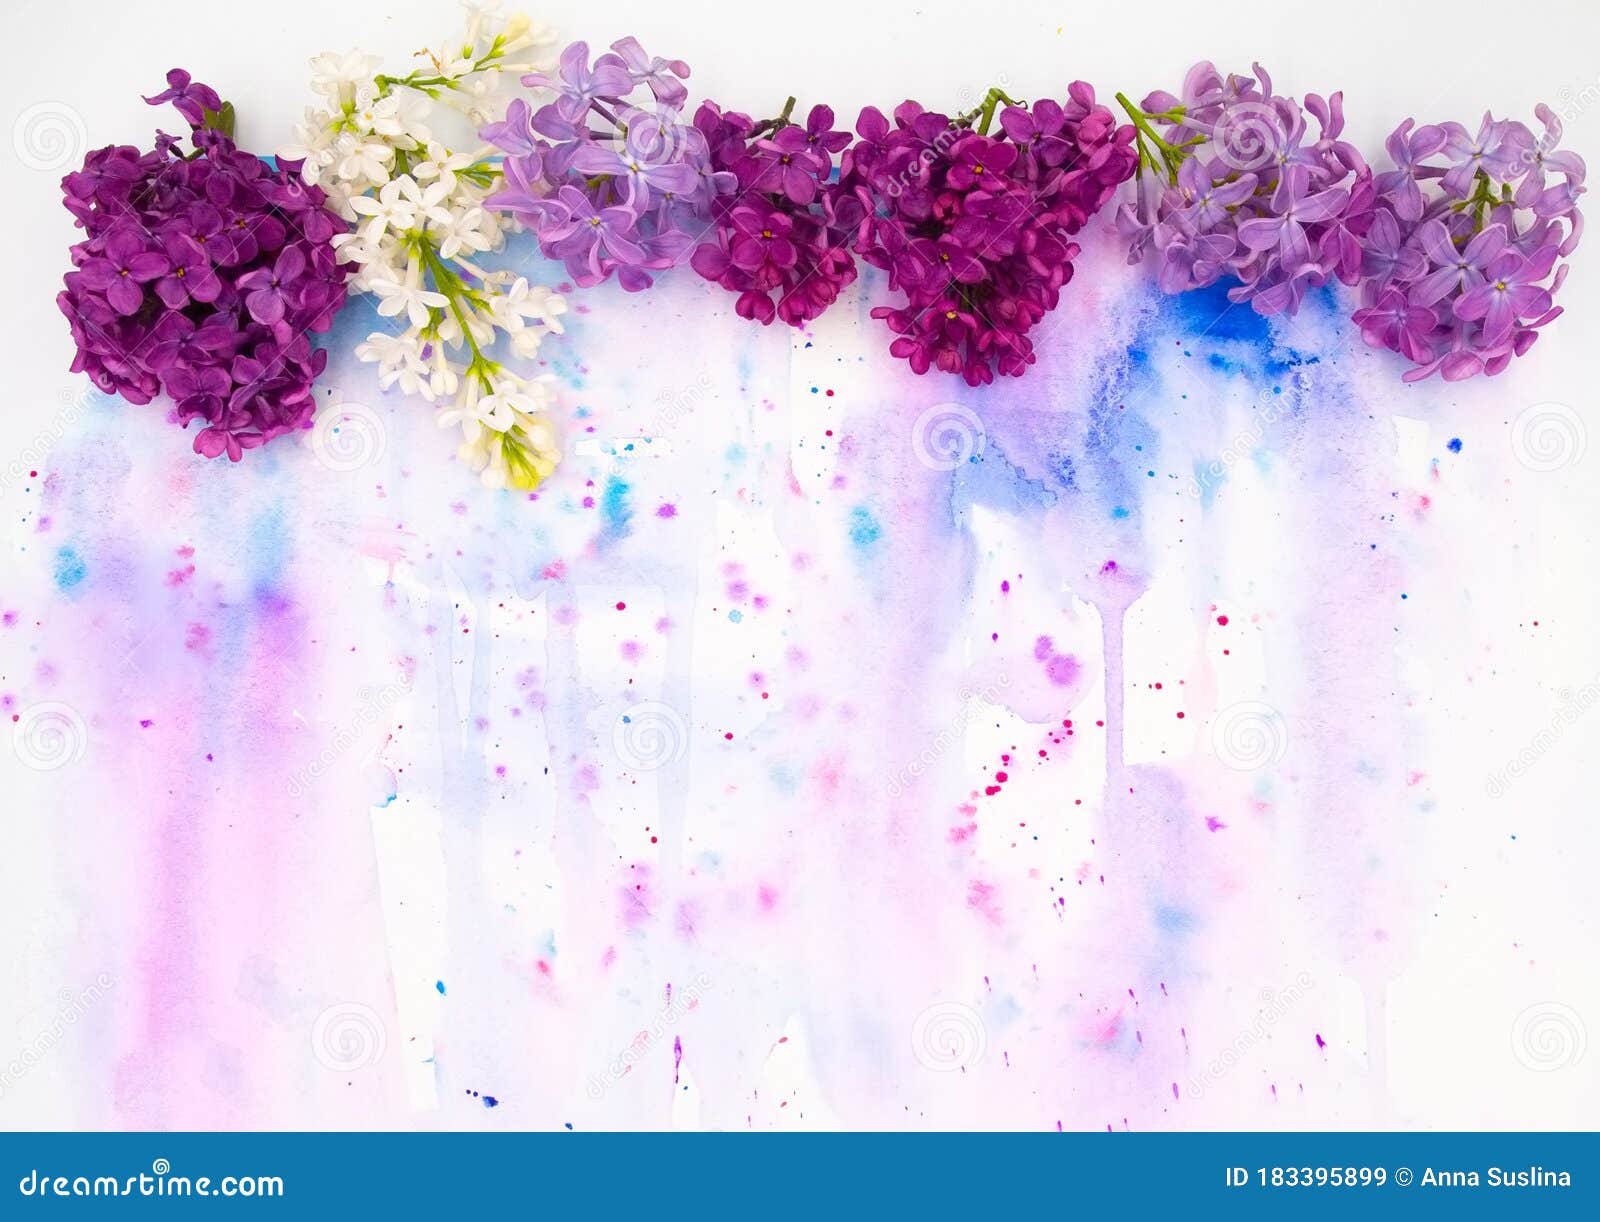 Purple Violet Lilac Spring Flowers and Hand Painted Watercolor Blot Spot on  White Background. A4 Paper Size Border Frame Photo Stock Image - Image of  copy, invitation: 183395899